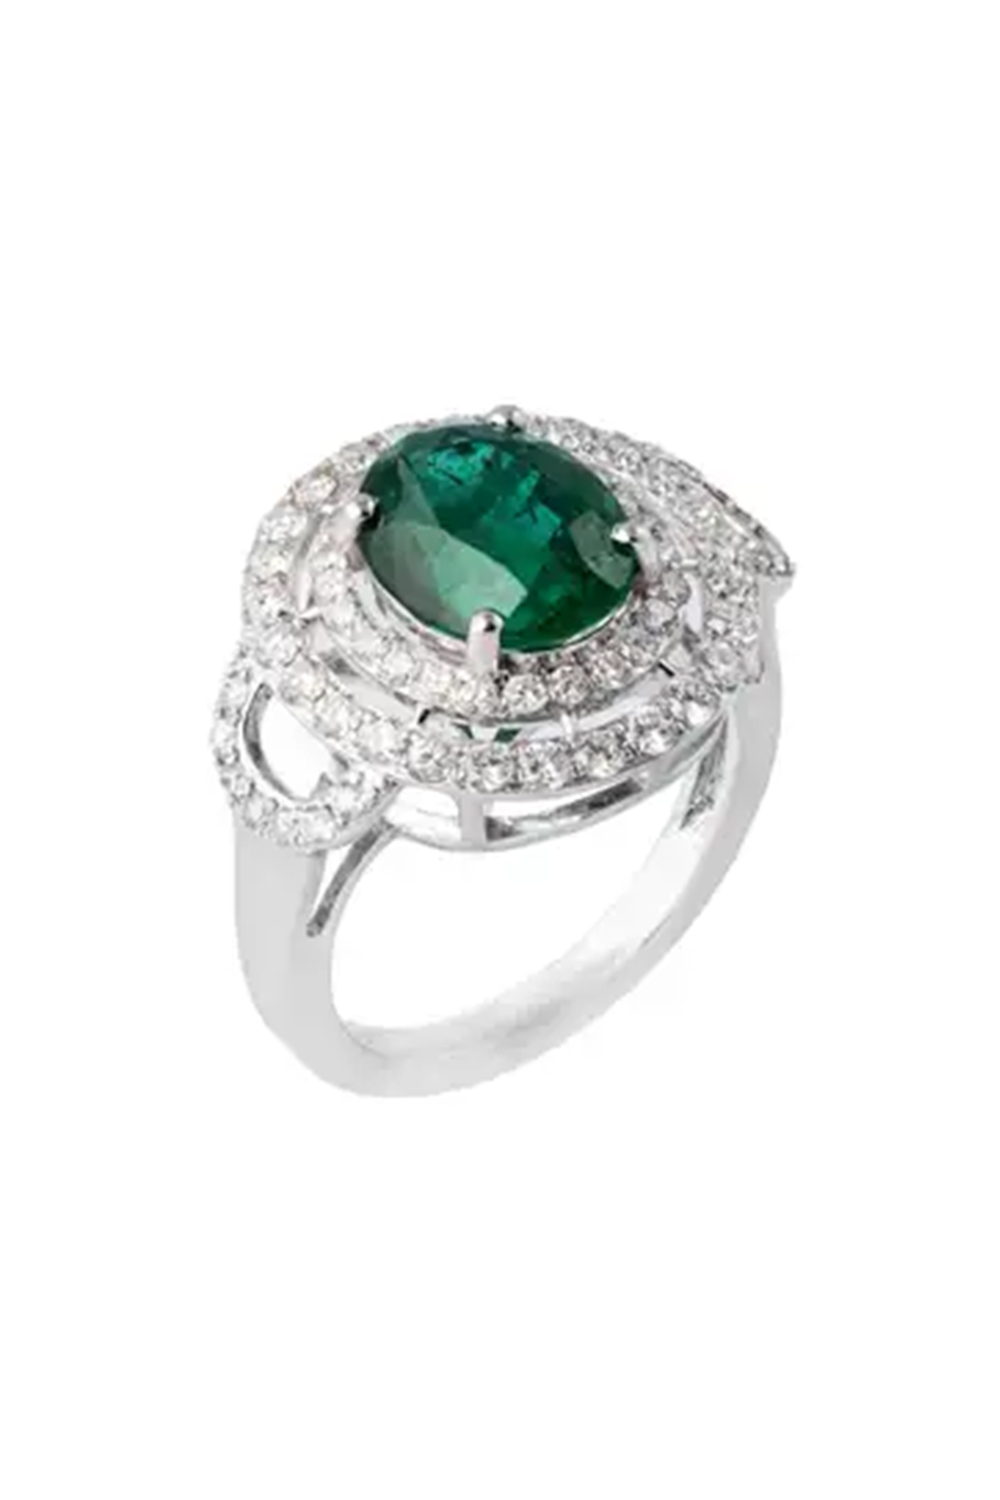 3.36cts Zambian Emerald Ring with 1.01cts Diamonds and 14k Gold